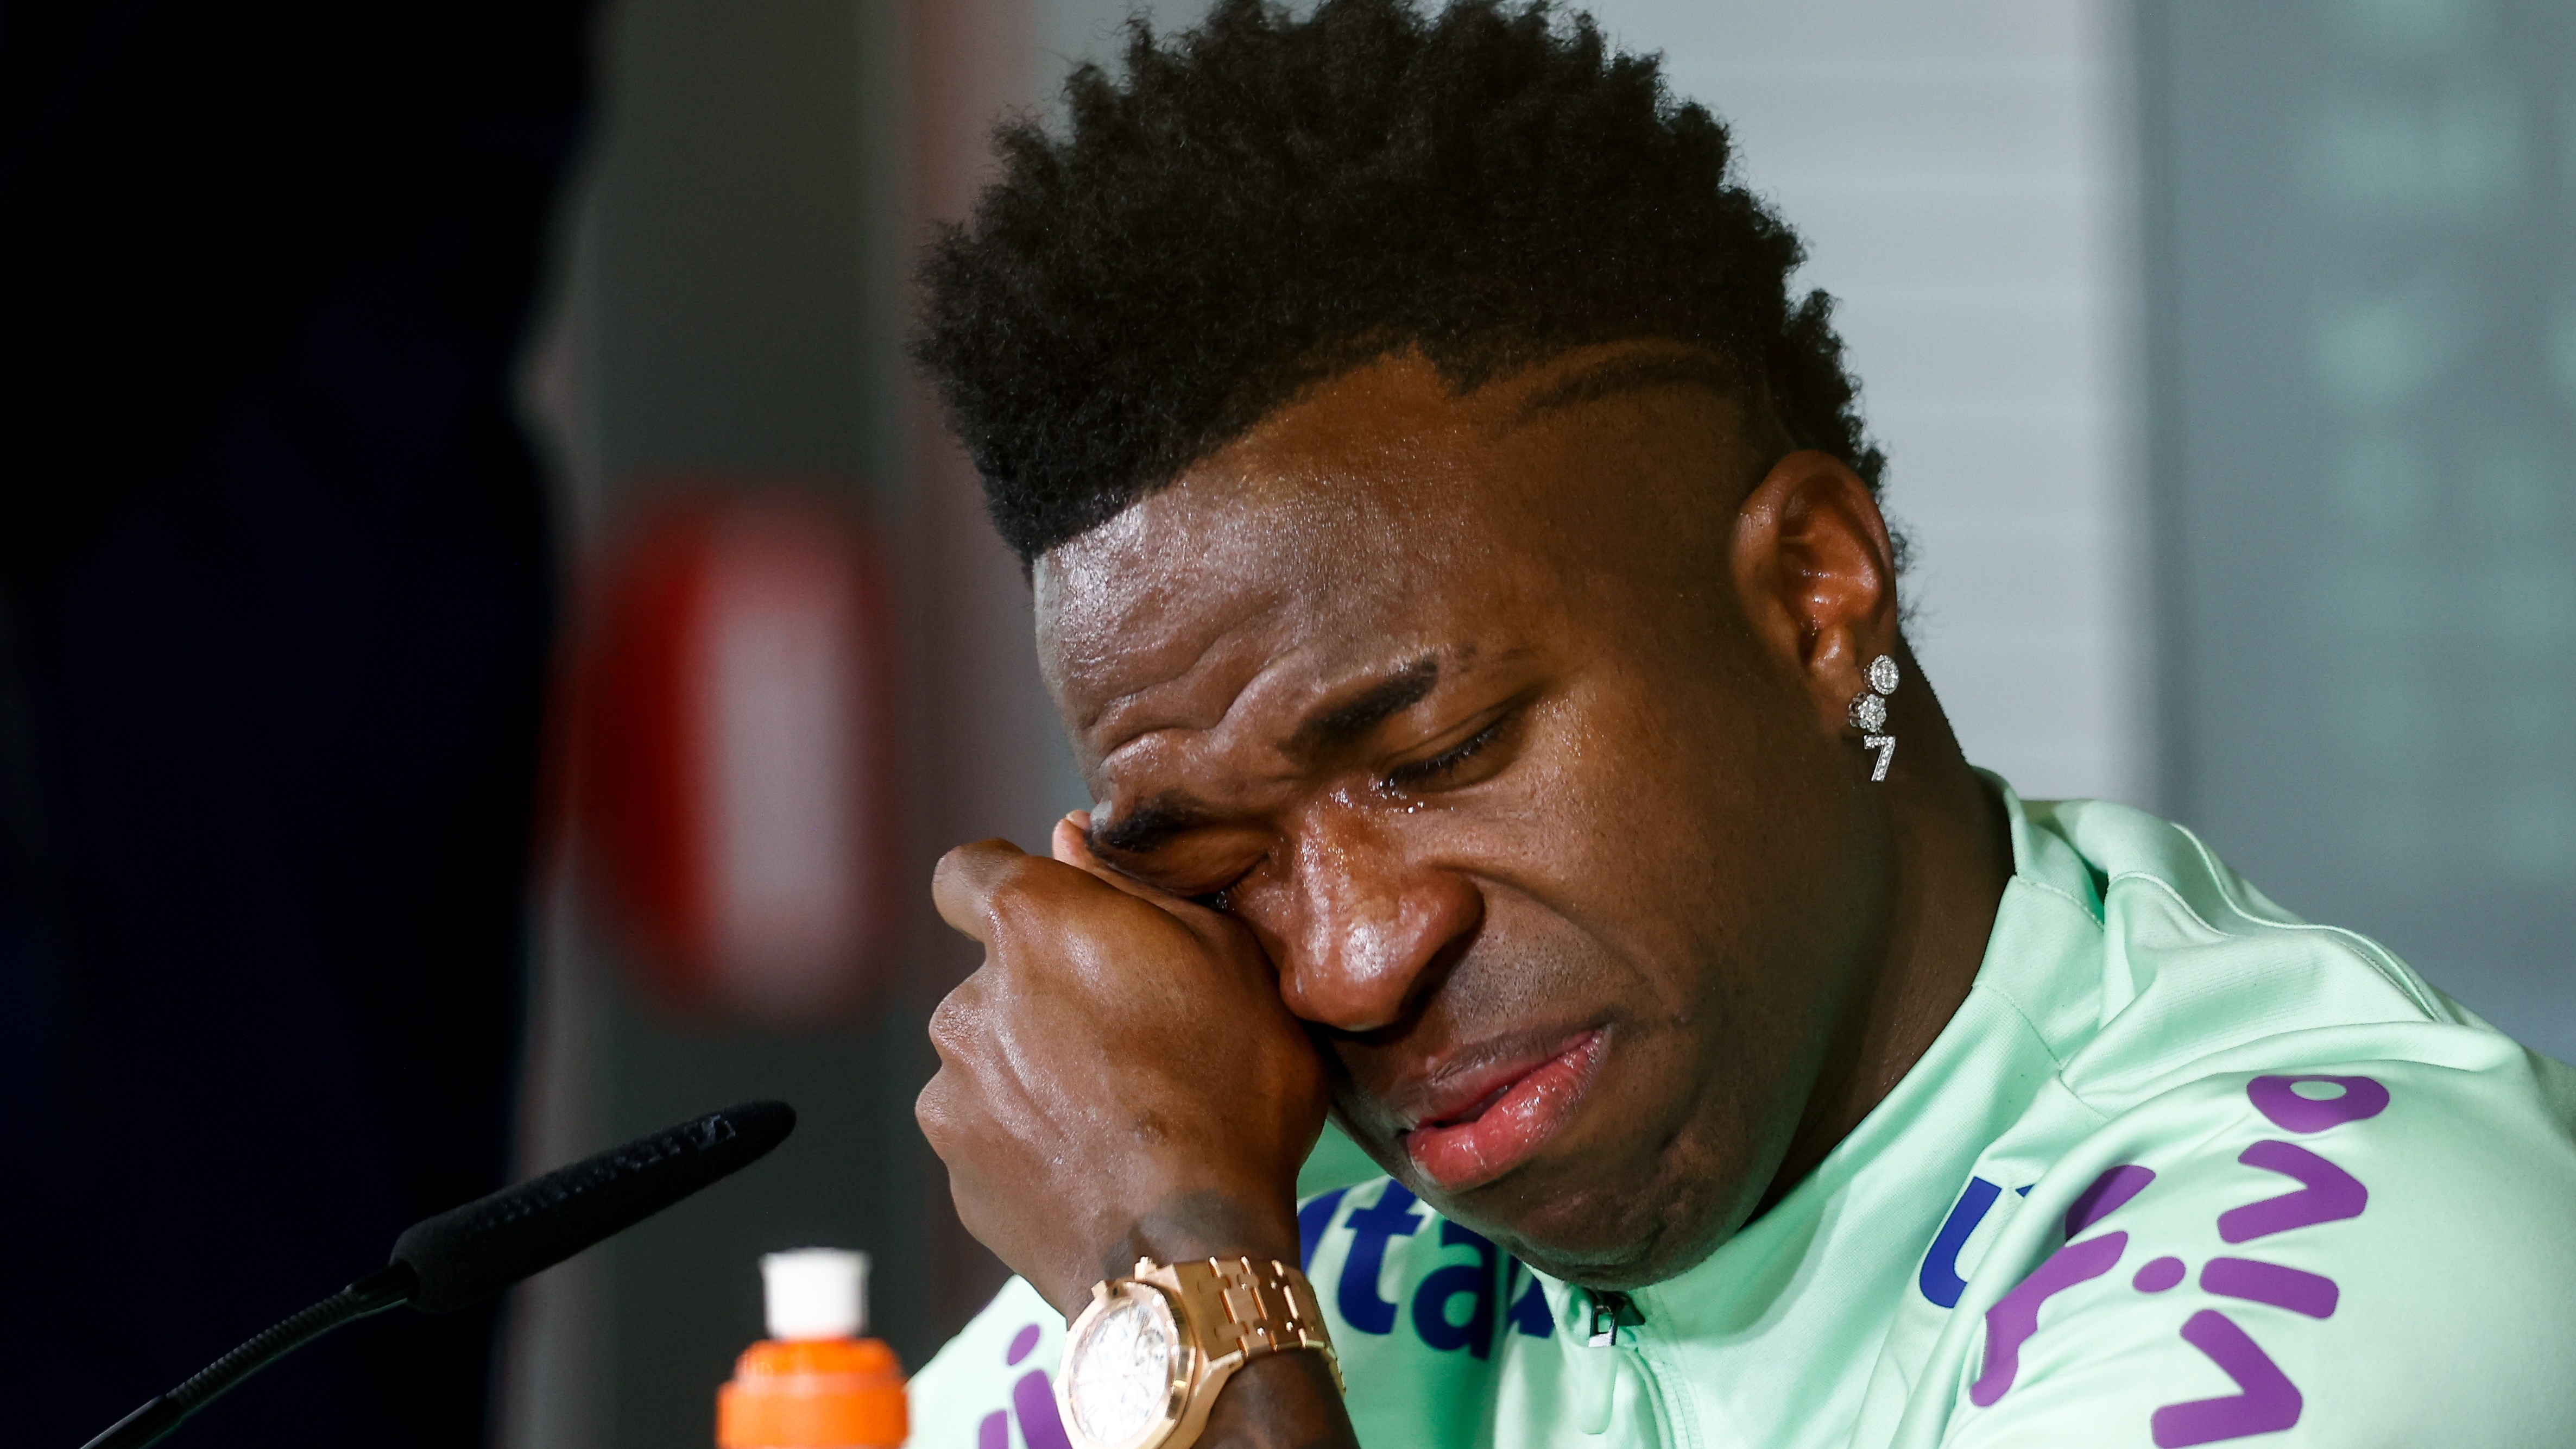 ‘I’m losing desire to play’ – Vinícius Jr breaks down over racist abuse